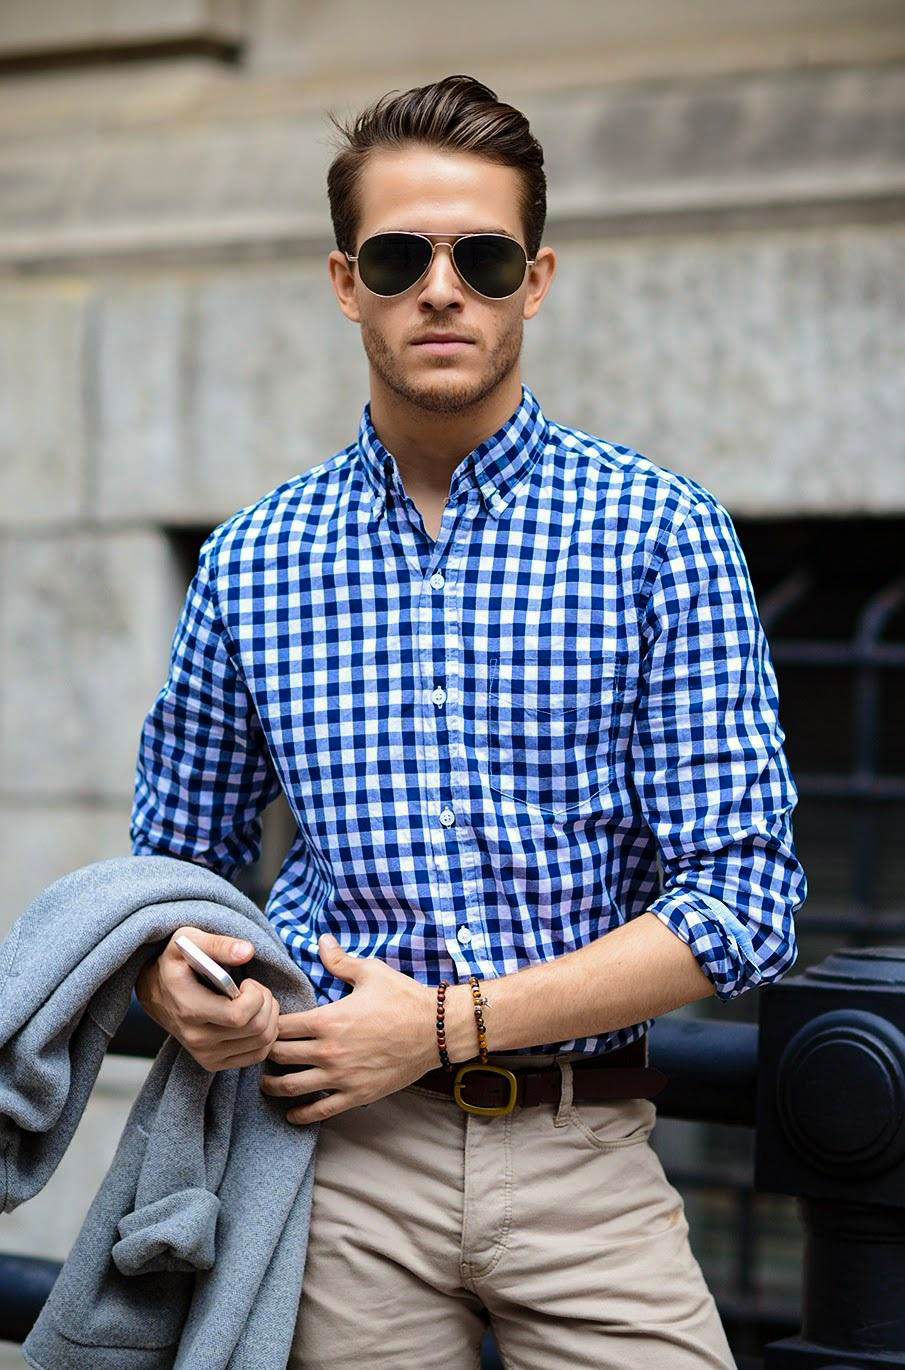 wearing blue checkered shirt with khaki trousers